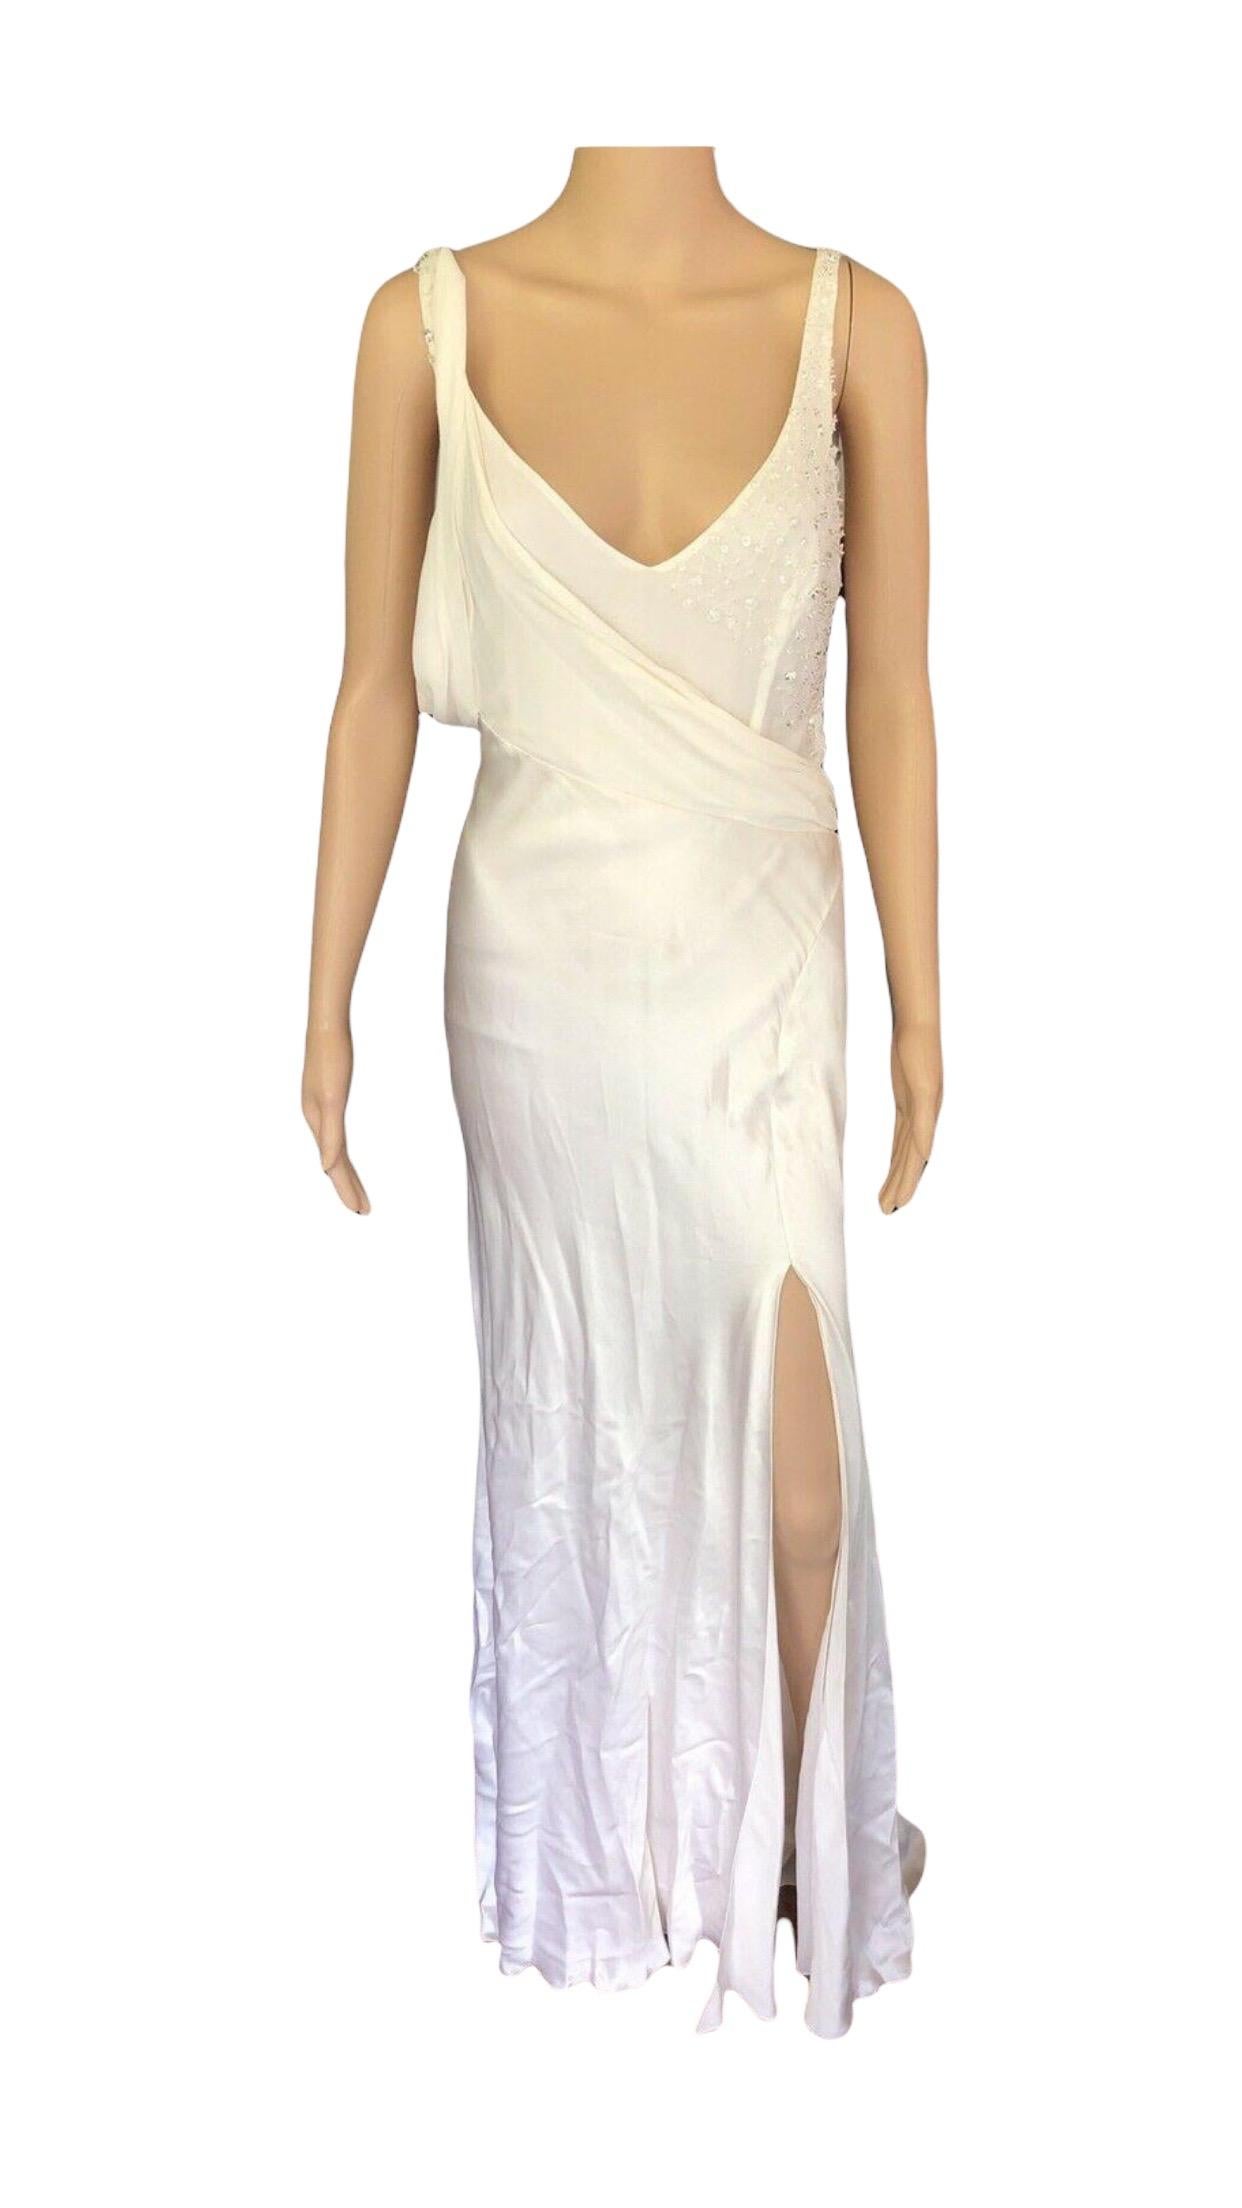 Versace S/S 2005 Embellished Cutout Back Ivory Dress Gown 3